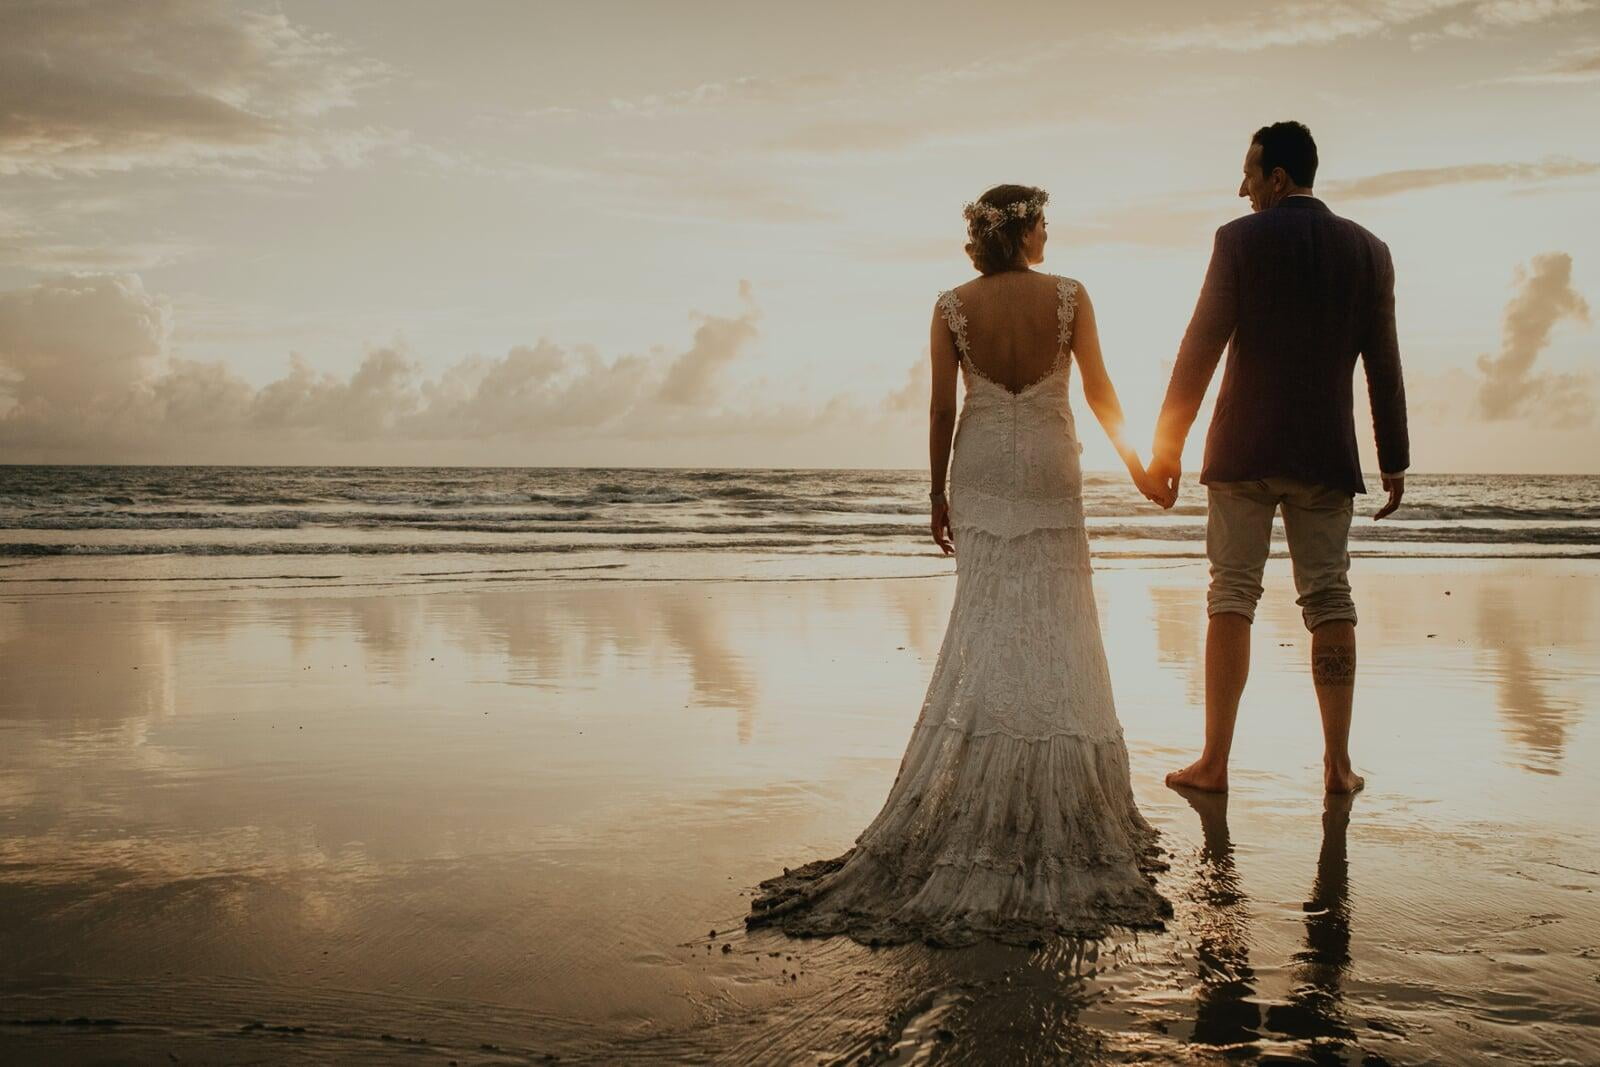 Choosing The Best Time Of Year To Plan A Destination Wedding